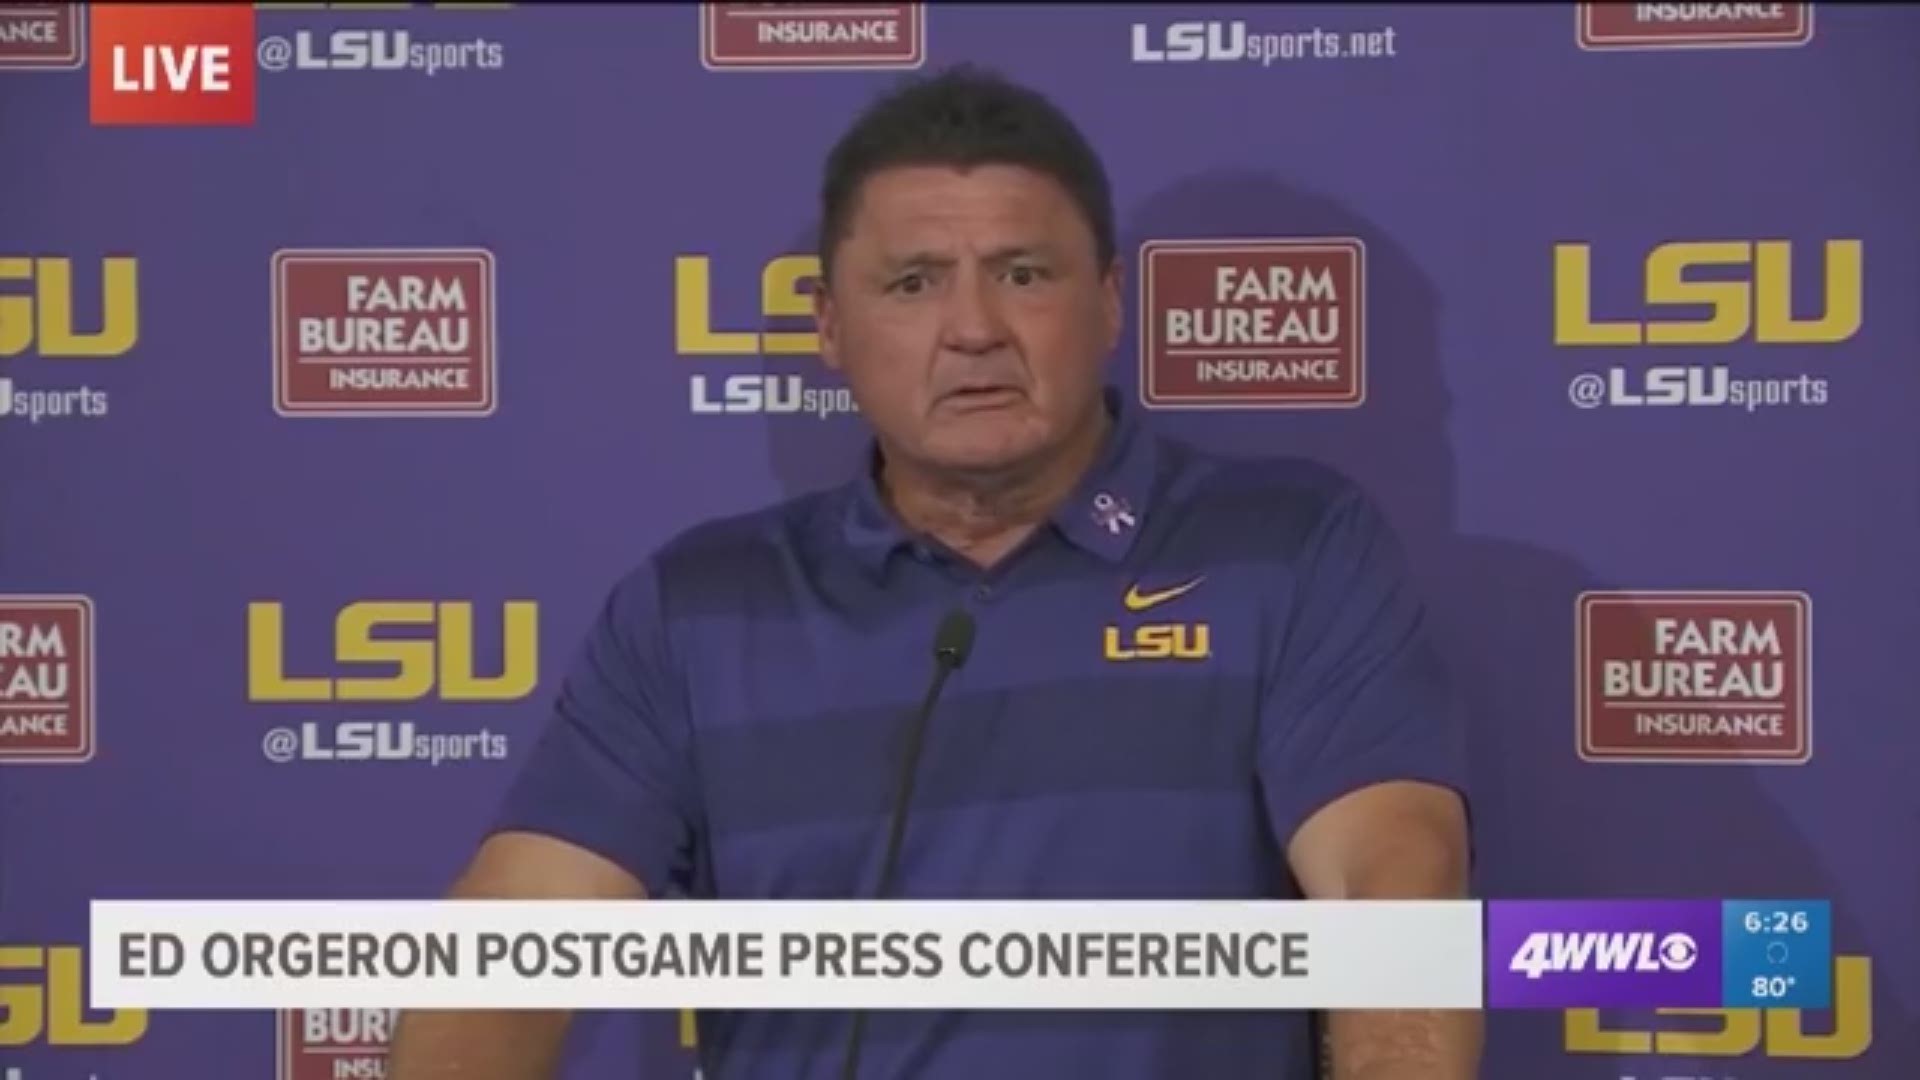 "These guys work so hard. I'm just glad to be a part of it," Coach O said.